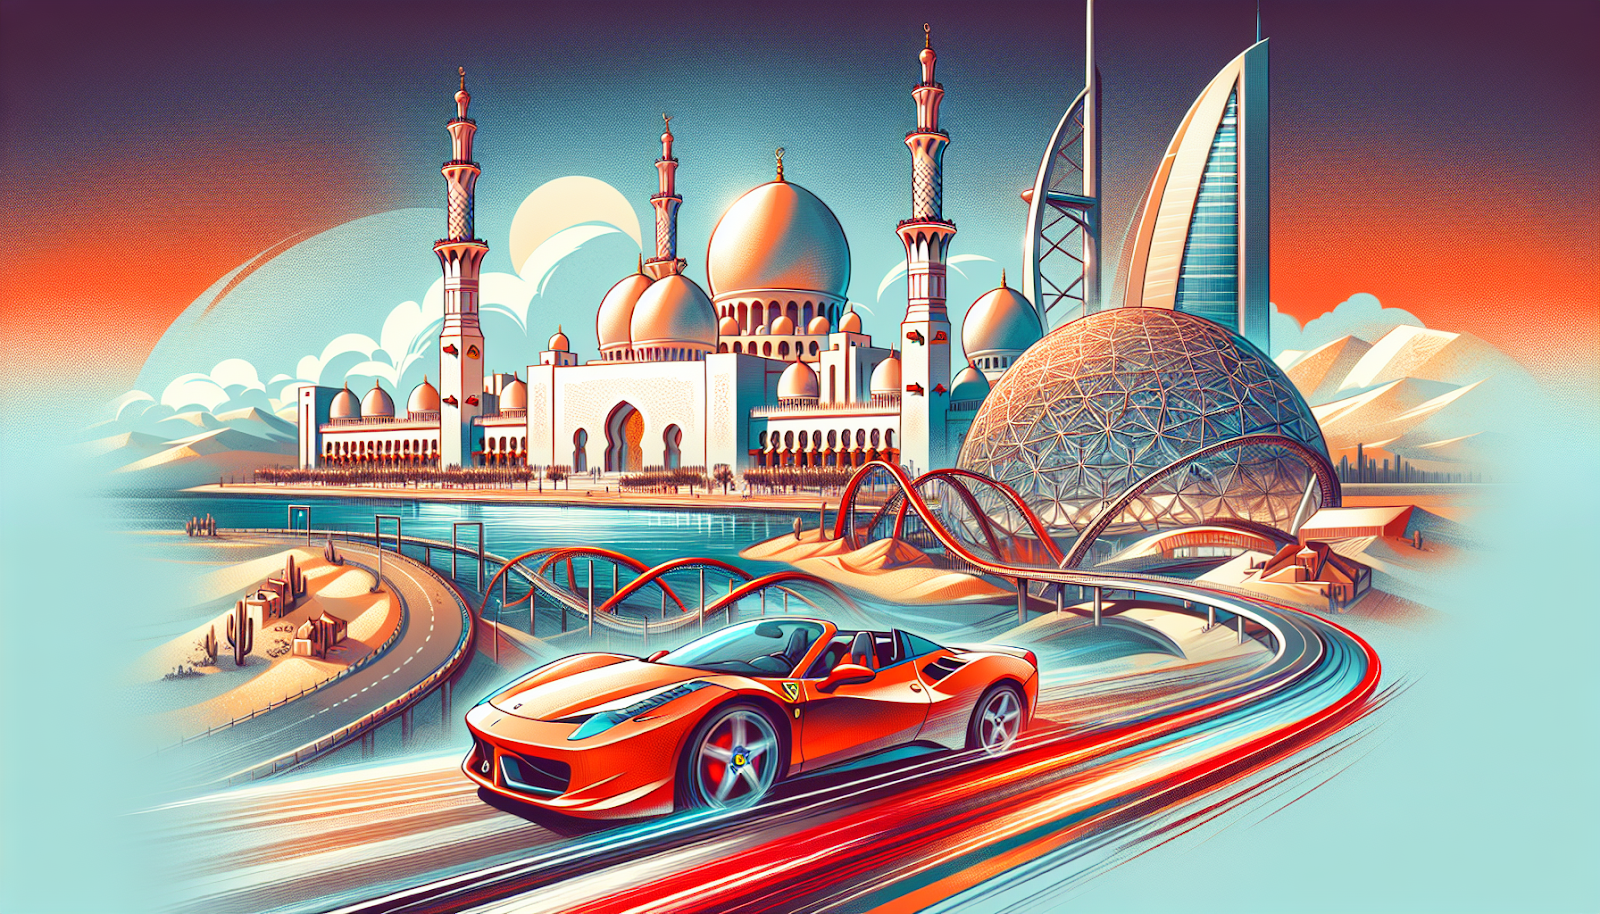 Illustration of tourist attractions along the route from Dubai to Abu Dhabi